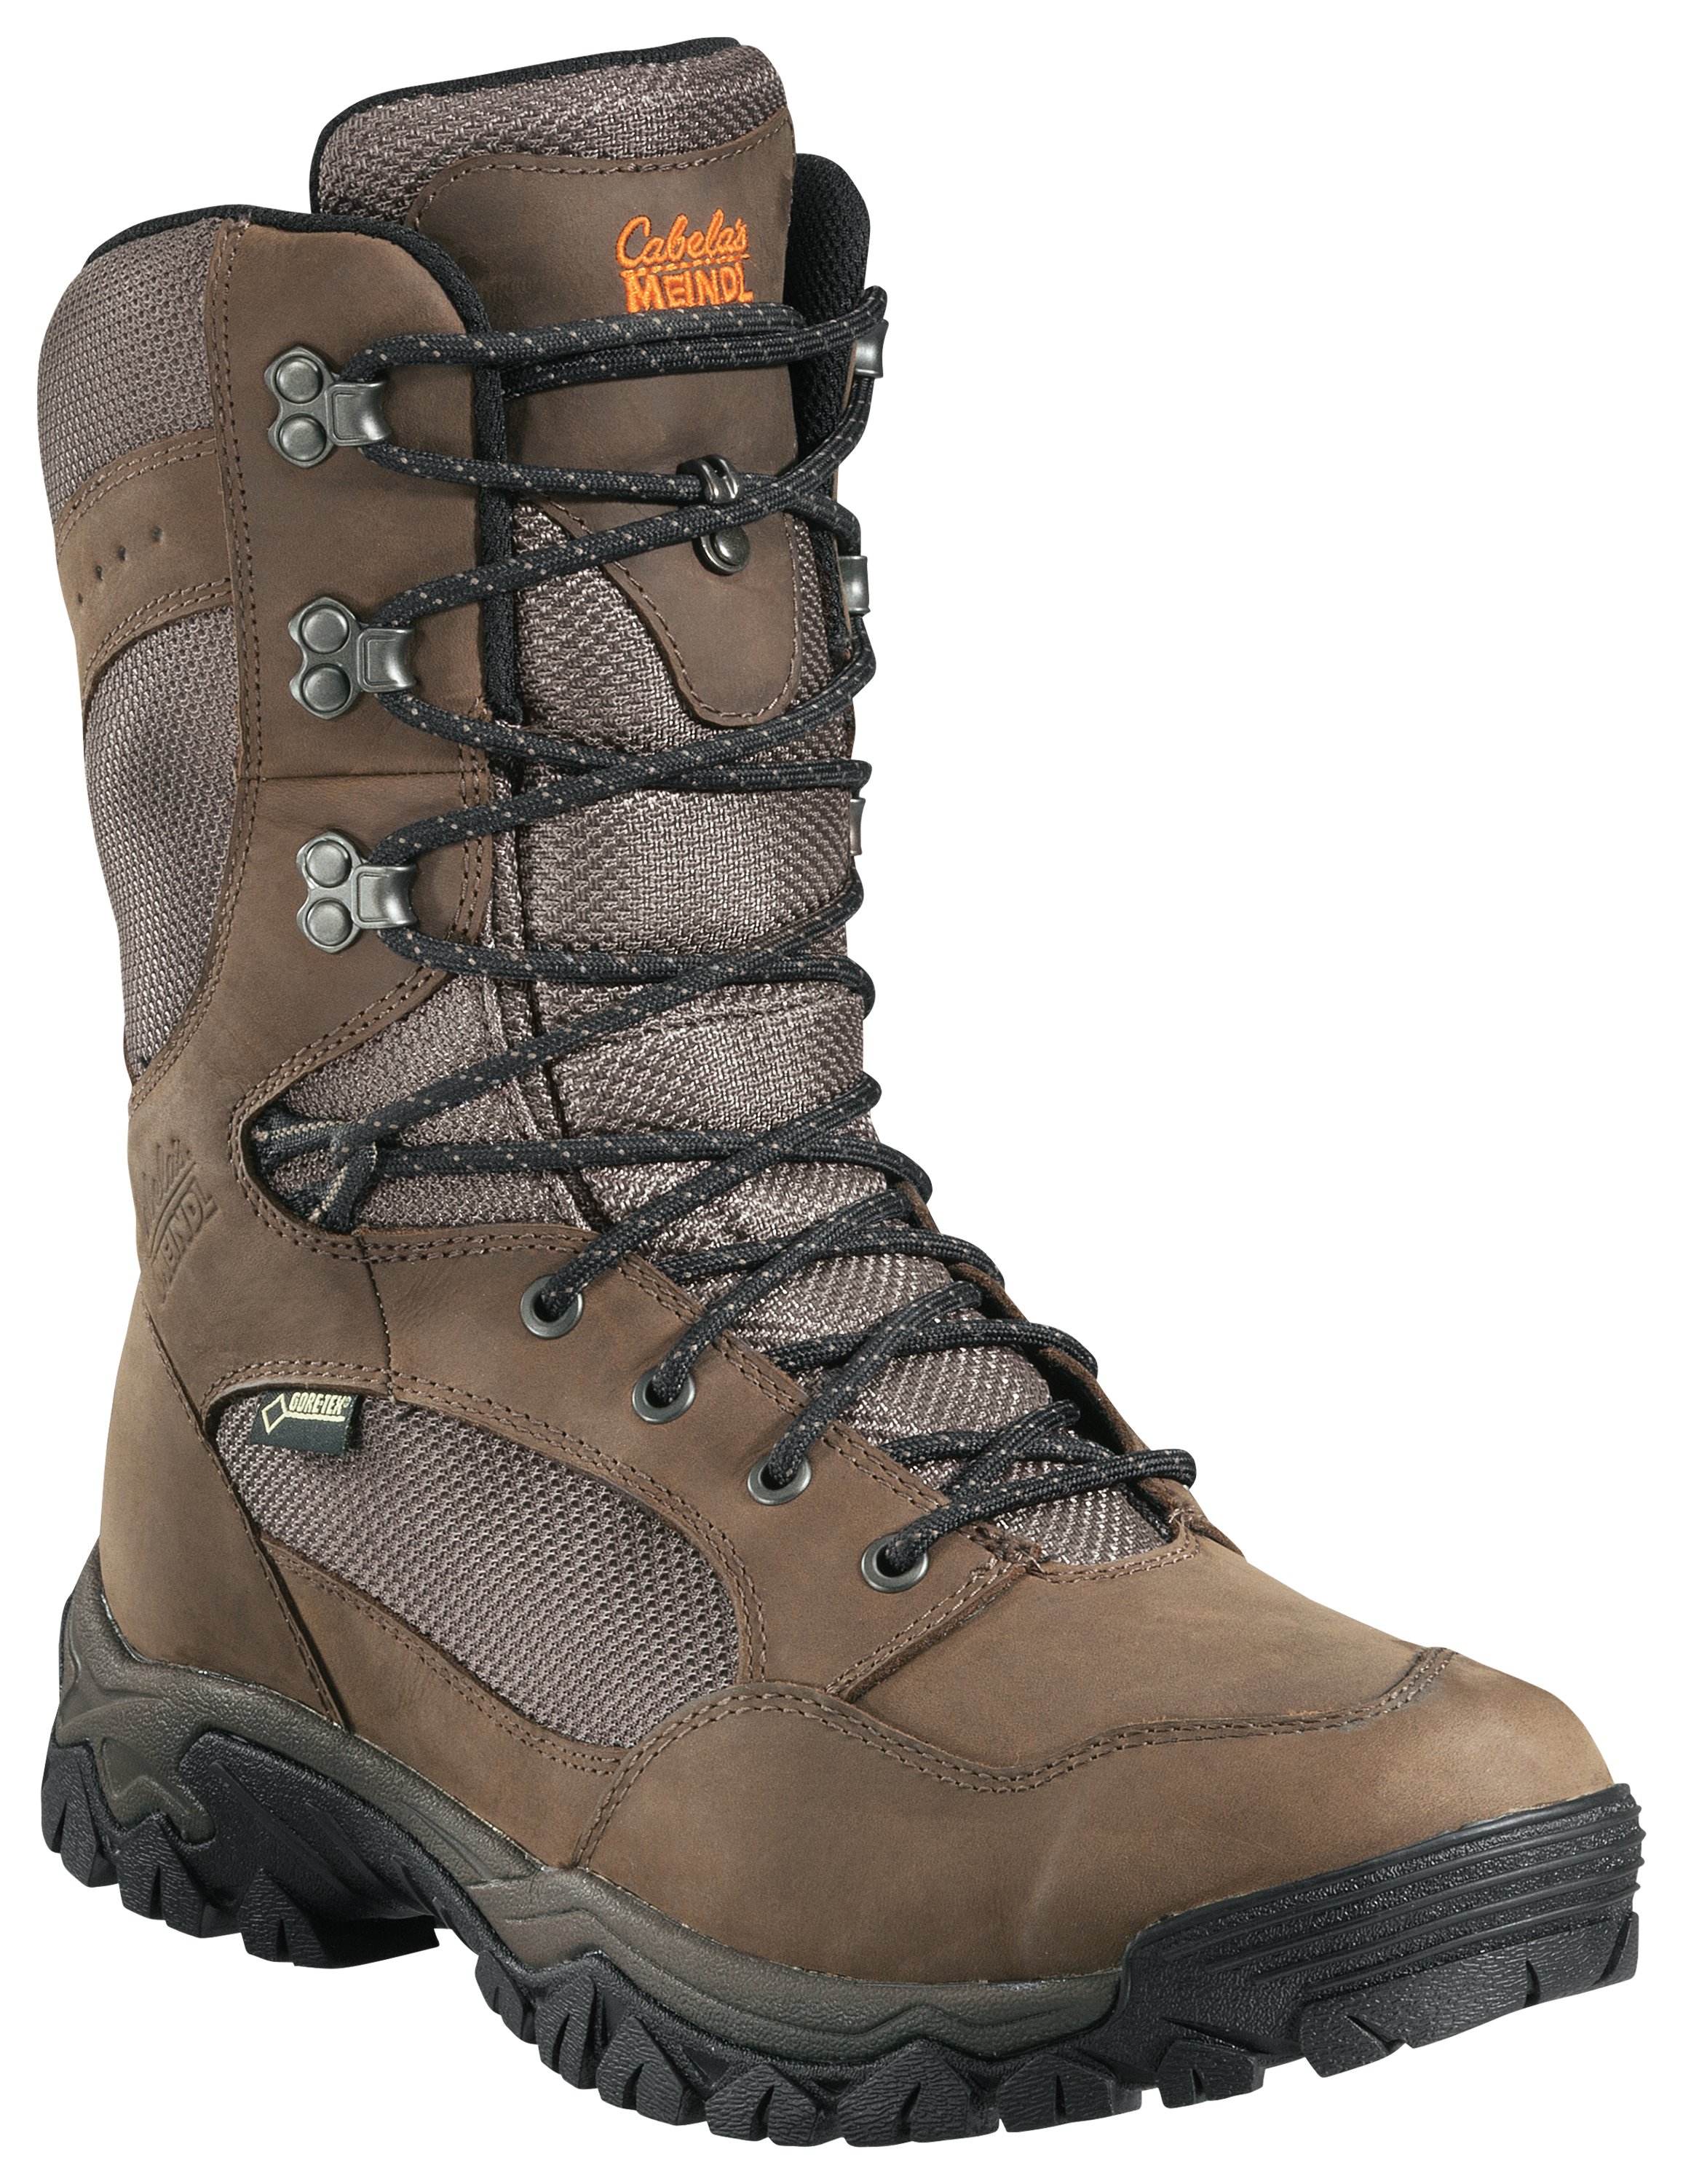 Cabela's MEINDL GORE-TEX Hunting Boots for Men